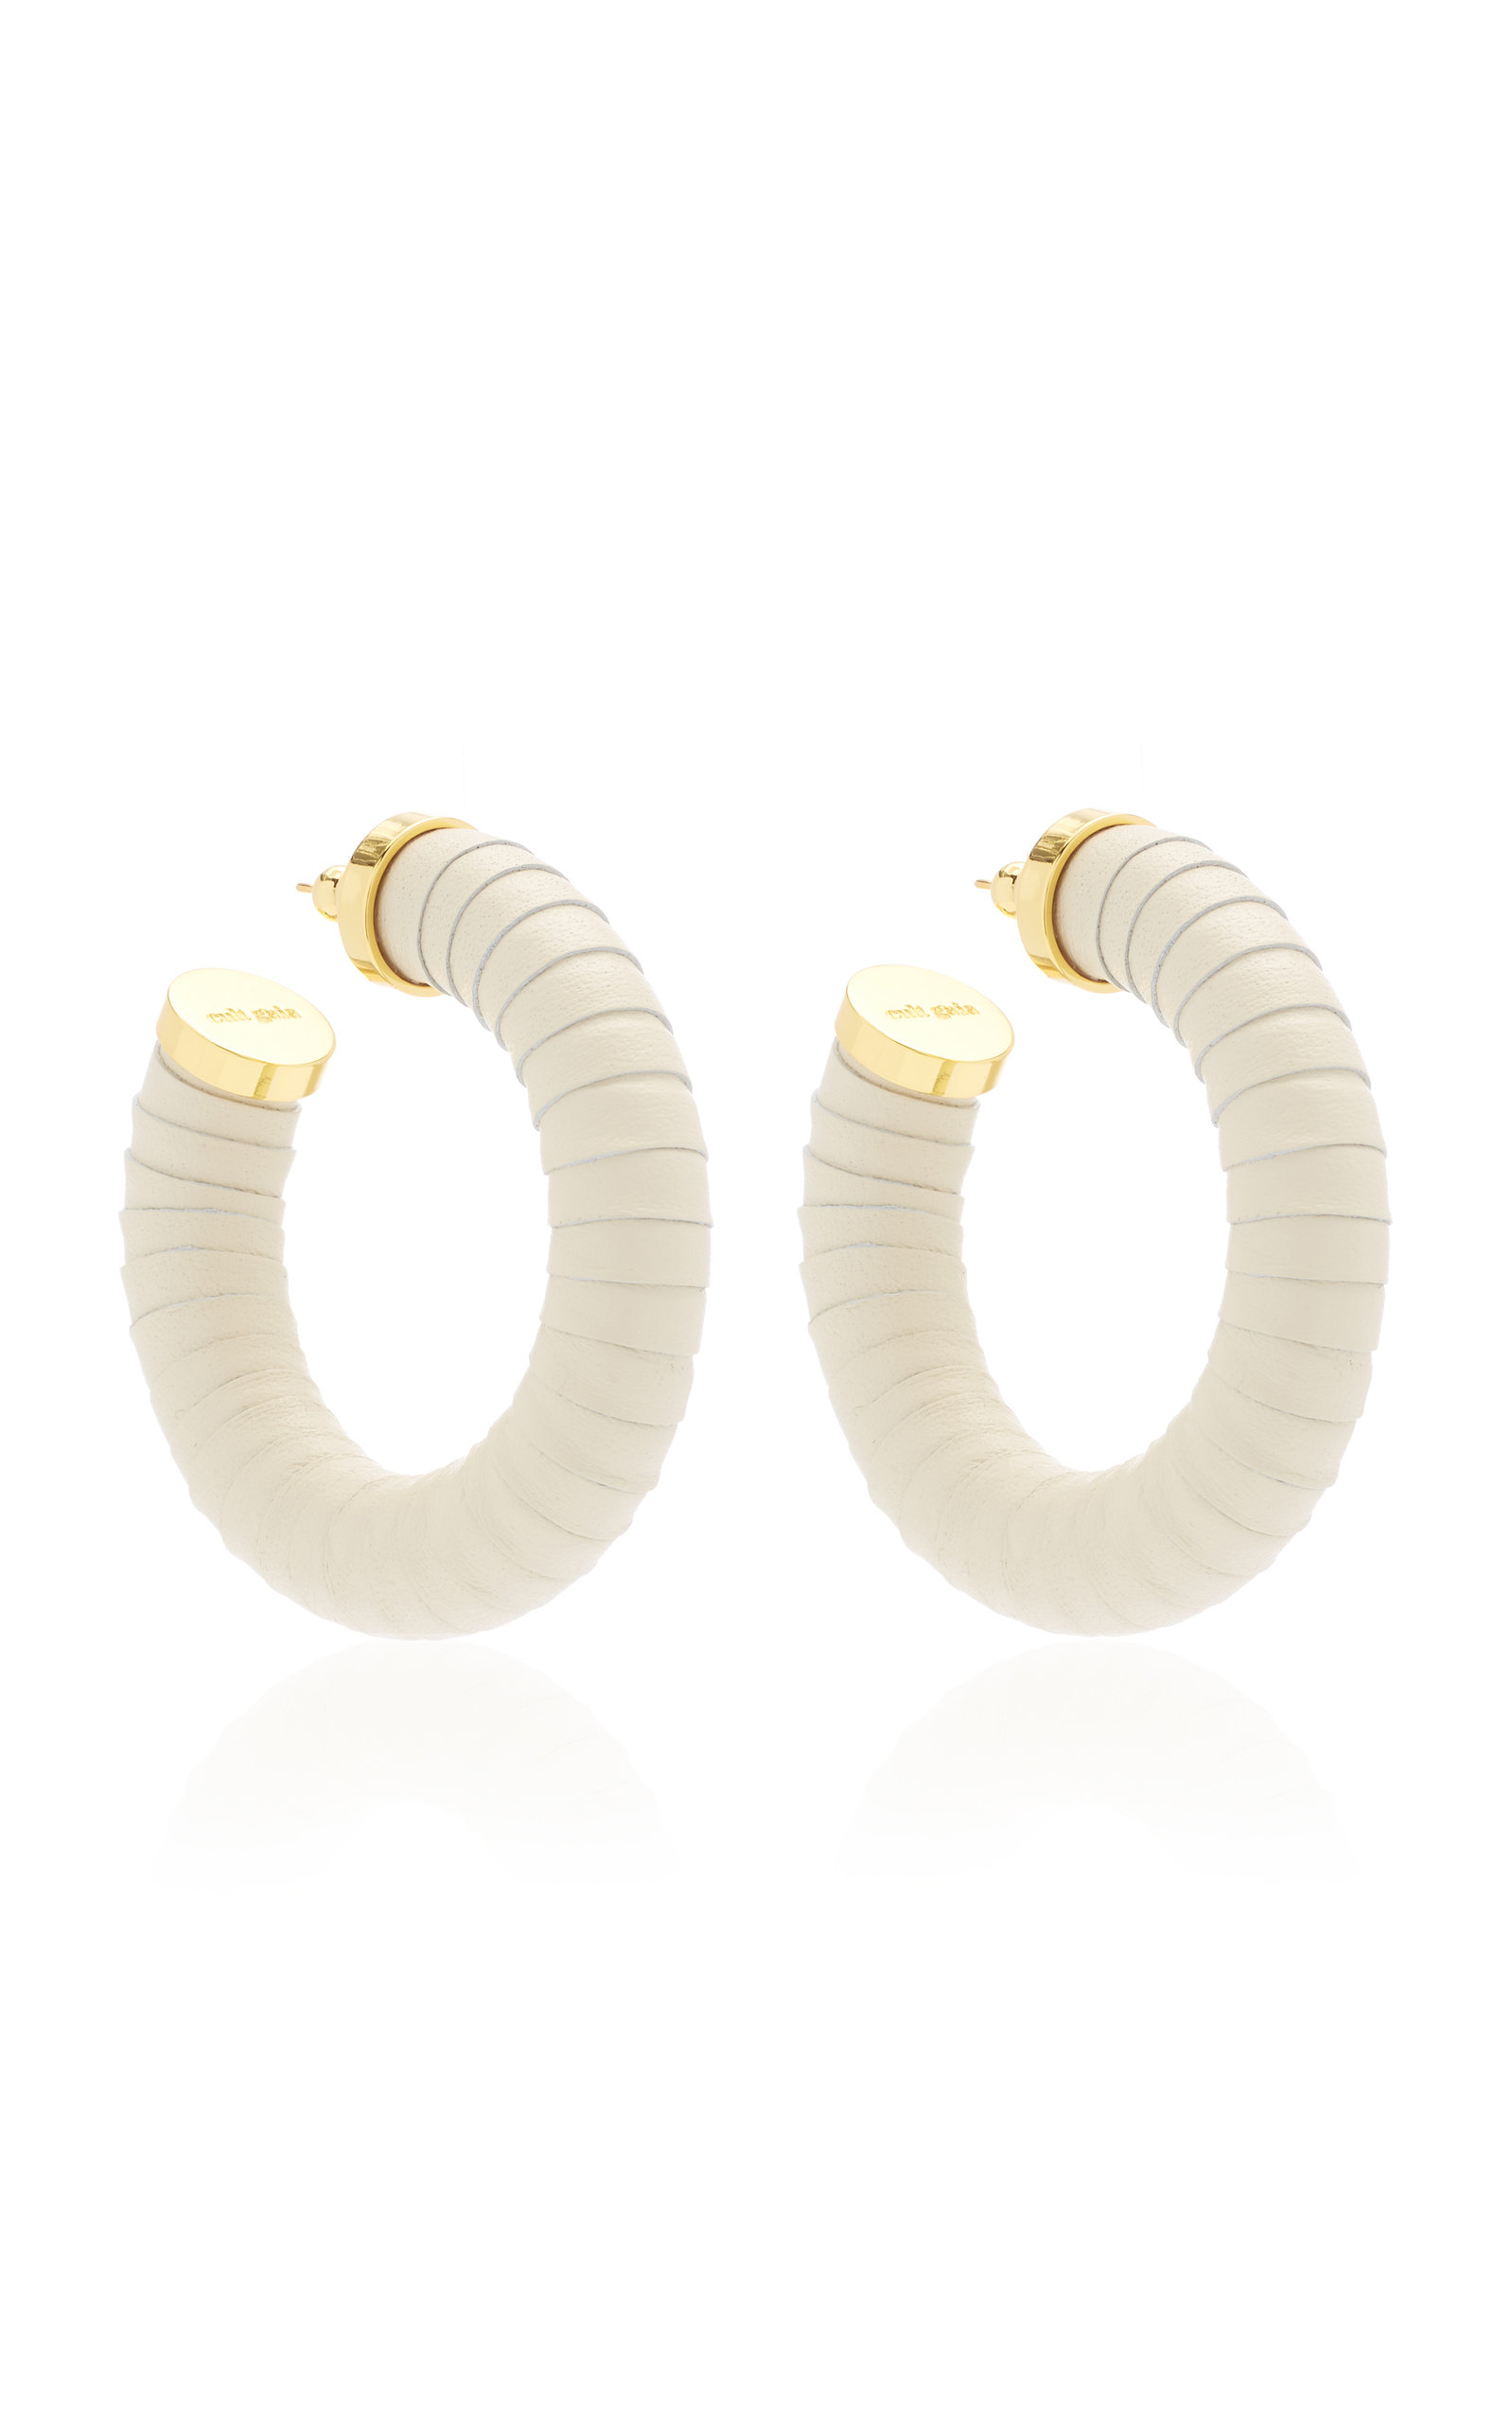 Cult Gaia - Women's Valence Gold-Plated Leather Hoop Earrings - White - Moda Operandi - Gifts For Her